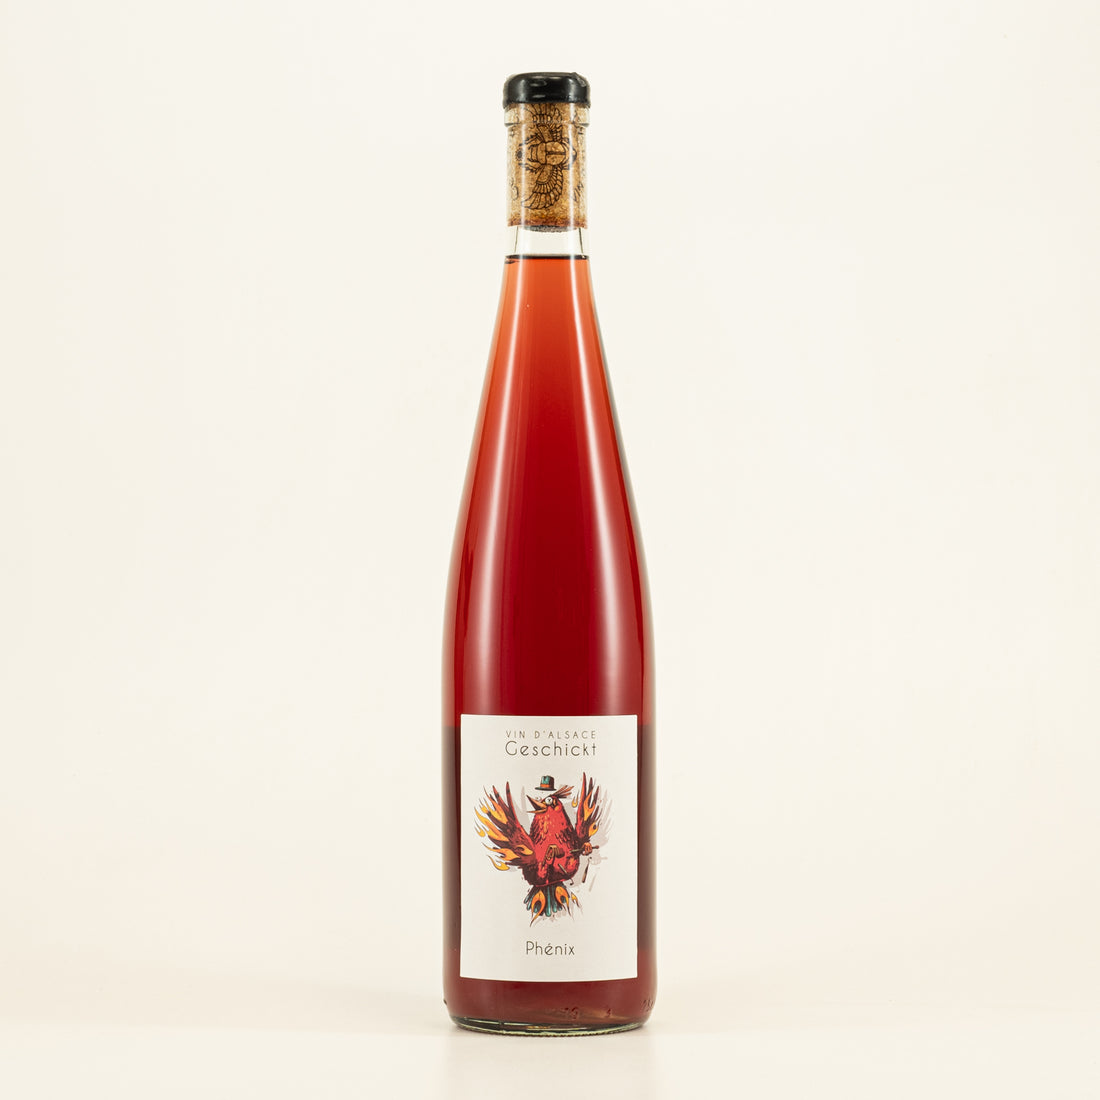 Domaine Geschickt Orange Natural Wine - Pinot Gris and Pinot Noir blend macerated for one month, aged in stainless steel tanks for up to 6 months. Intense aroma of tropical and red fruits including strawberries.